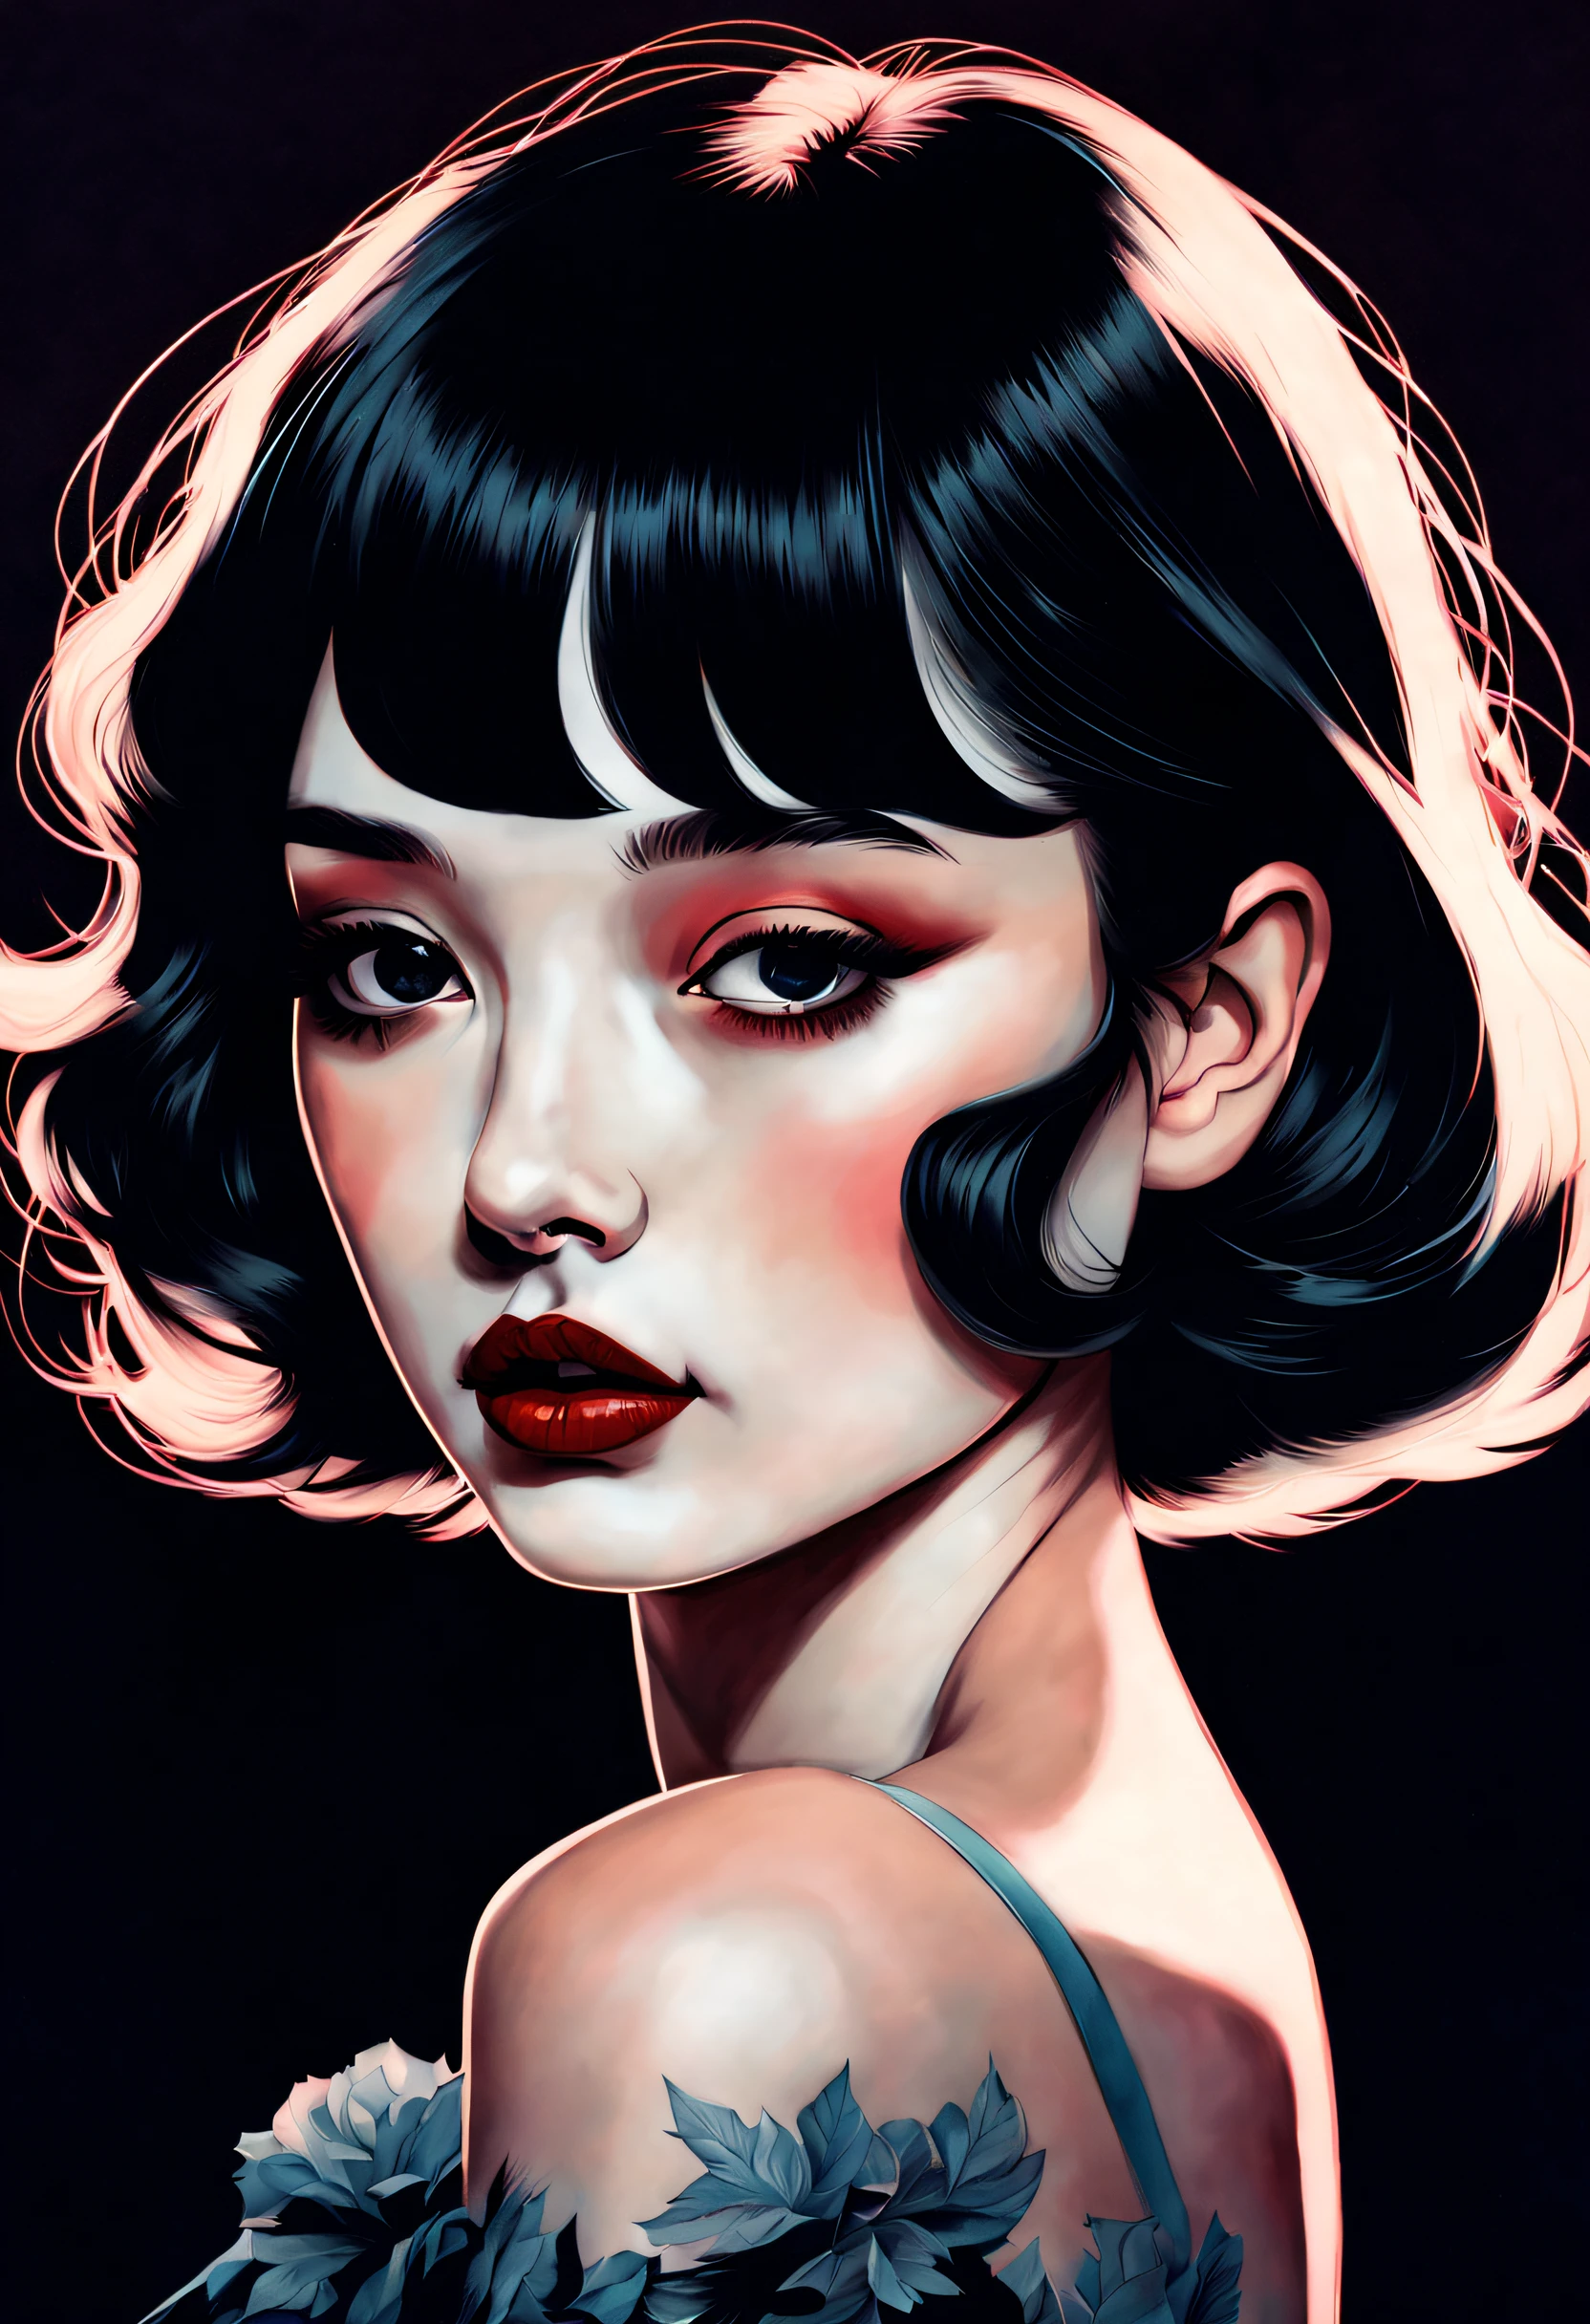 chiaroscuro technique on sensual illustration of an elegant girl, , vintage, eerie, matte painting, by Hannah Dale, by Harumi Hironaka, extremely soft colors, vibrant, highly detailed, digital illustrations , high contrast, dramatic, refined, tonal, facial expression